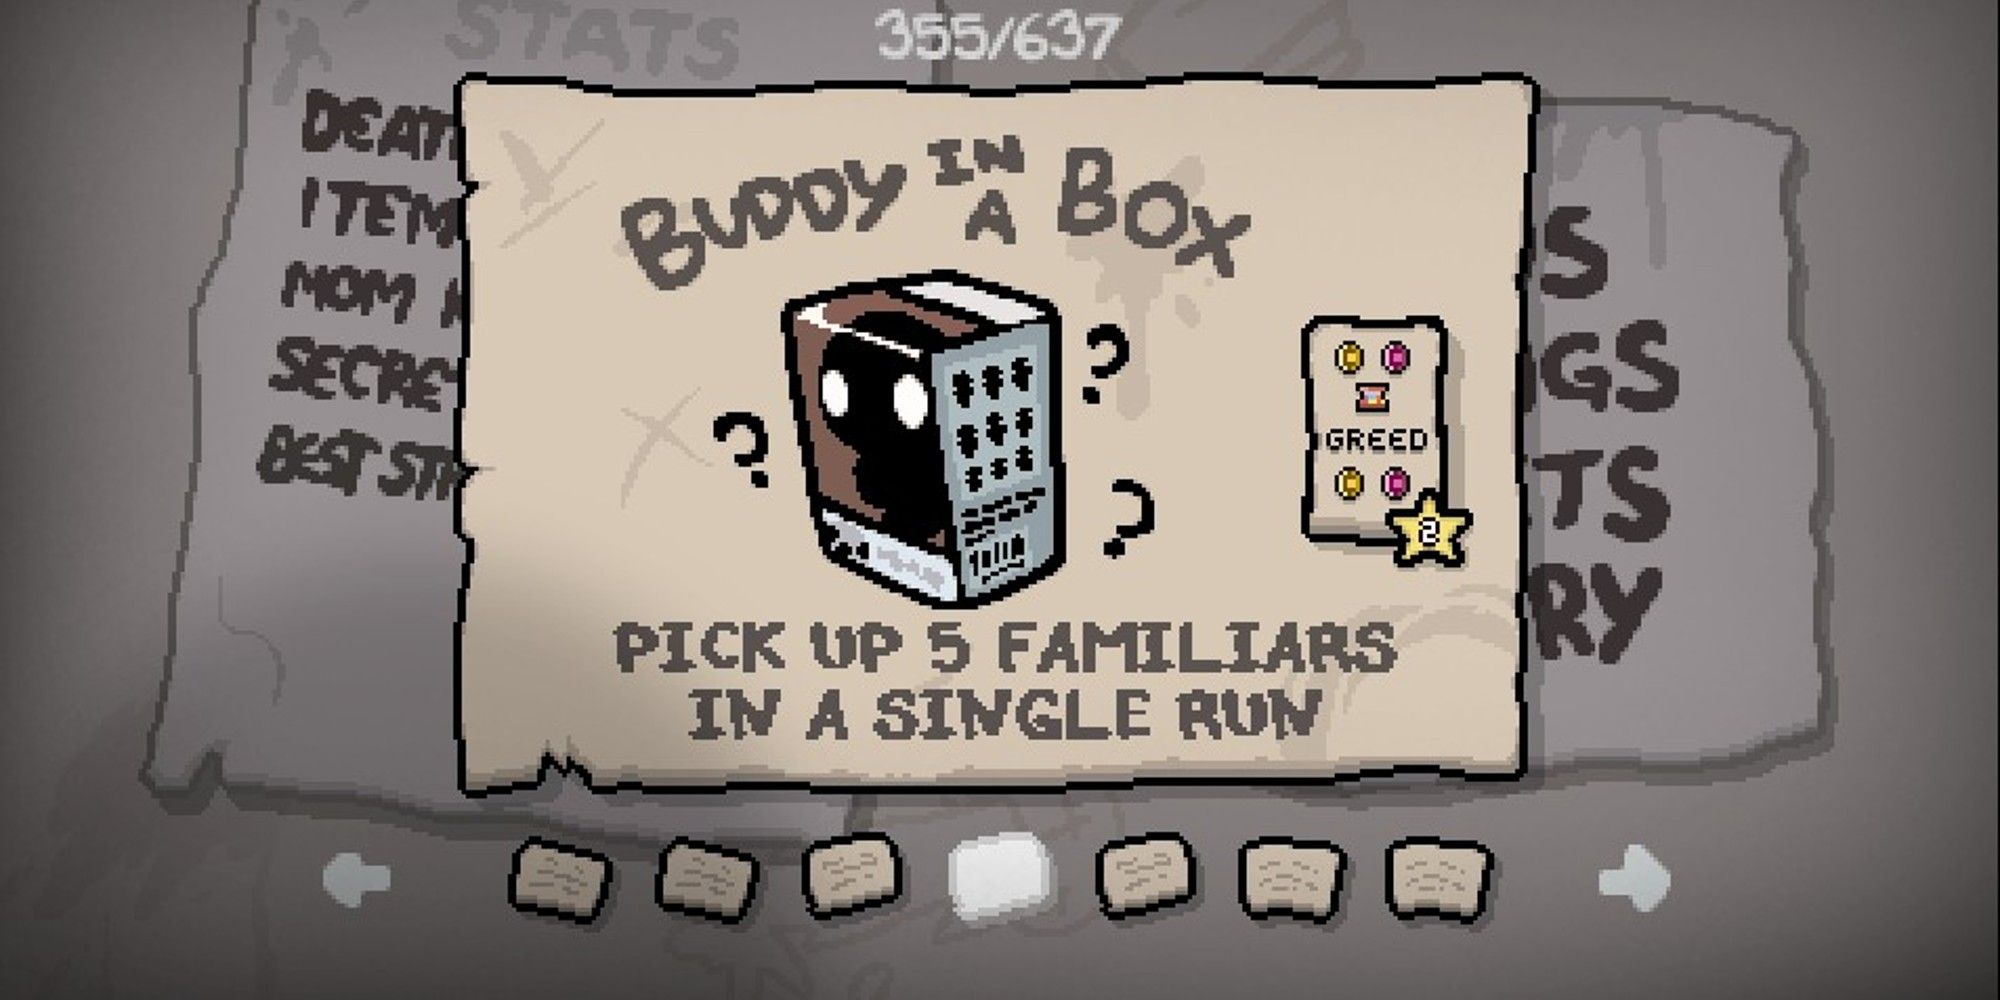 The Binding Of Isaac, Colored Achievement Descriptions Mod, Buddy In A Box achievement description seen